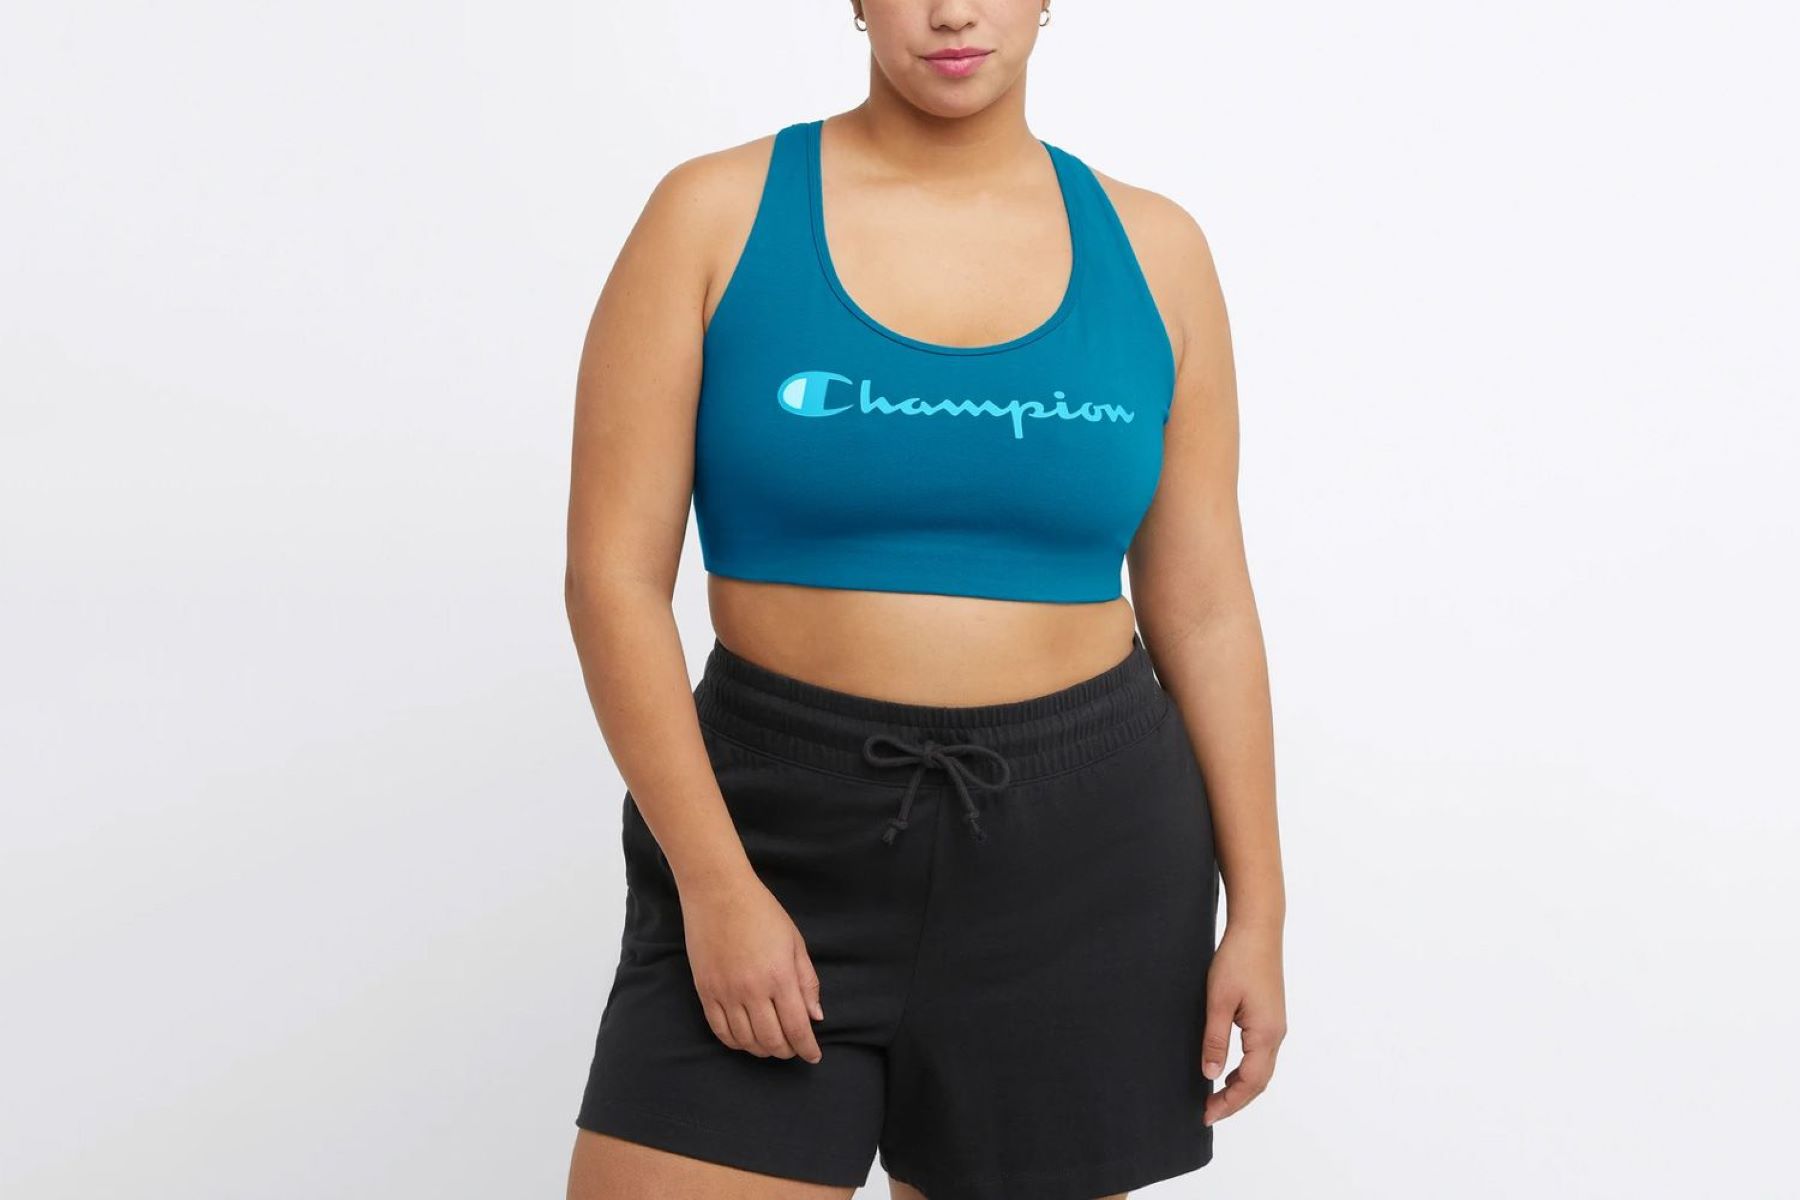 Where To Buy Champion Workout Clothes